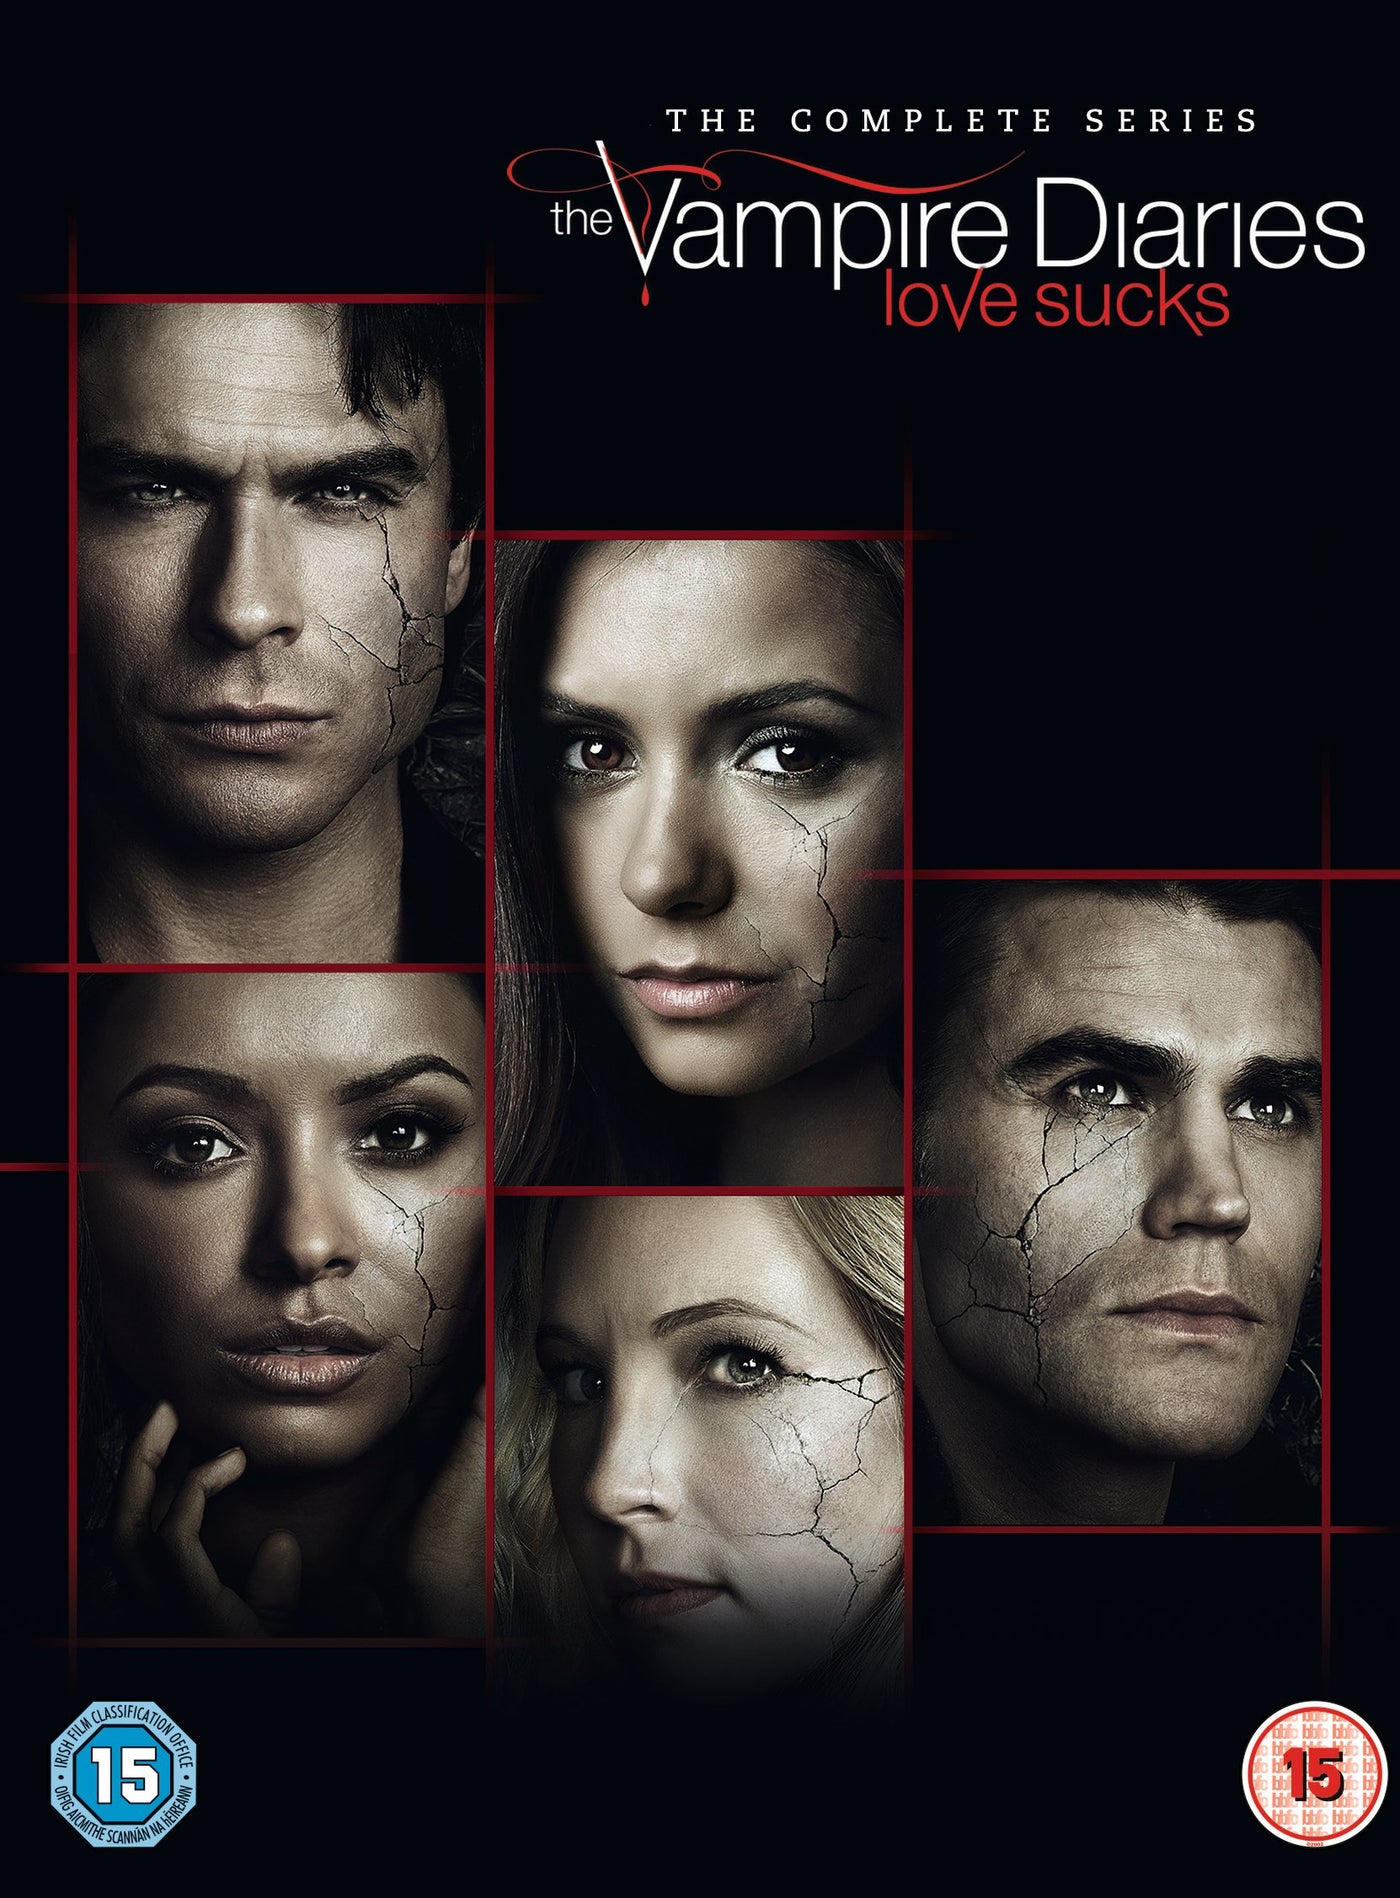 The Vampire Diaries: The Complete Series (DVD)